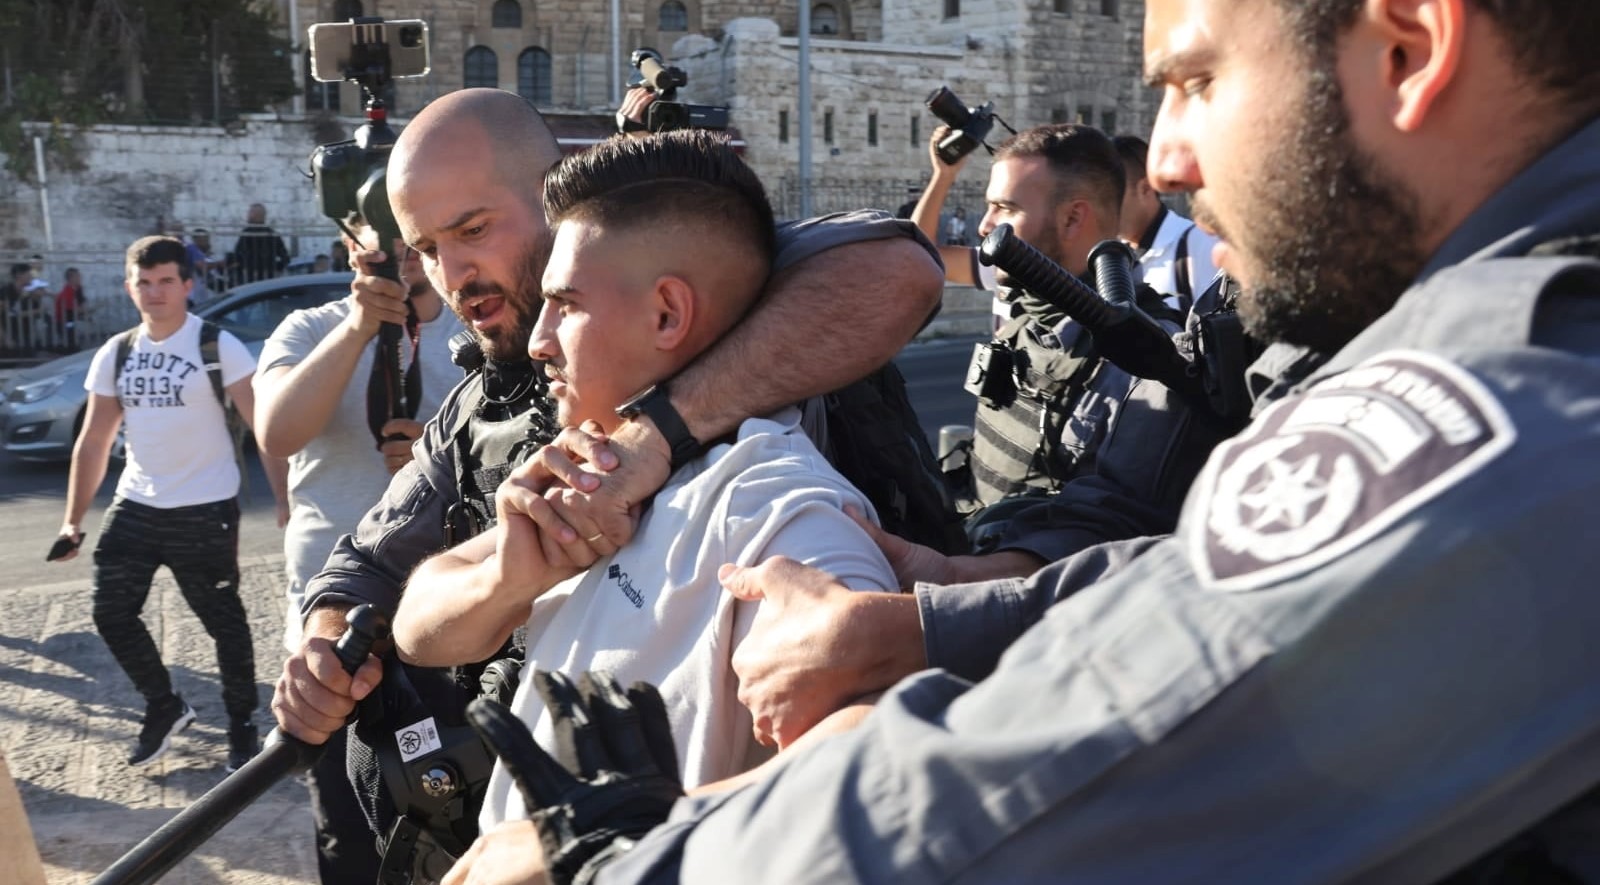 Israeli occupation forces suppress a demonstration in East Jerusalem last Friday, June 19, in which Palestinians protested settlers' being permitted to chant and incite against Palestine and the Prophet Mohammed during Israel's jingoistic "Flag March" three days earlier.